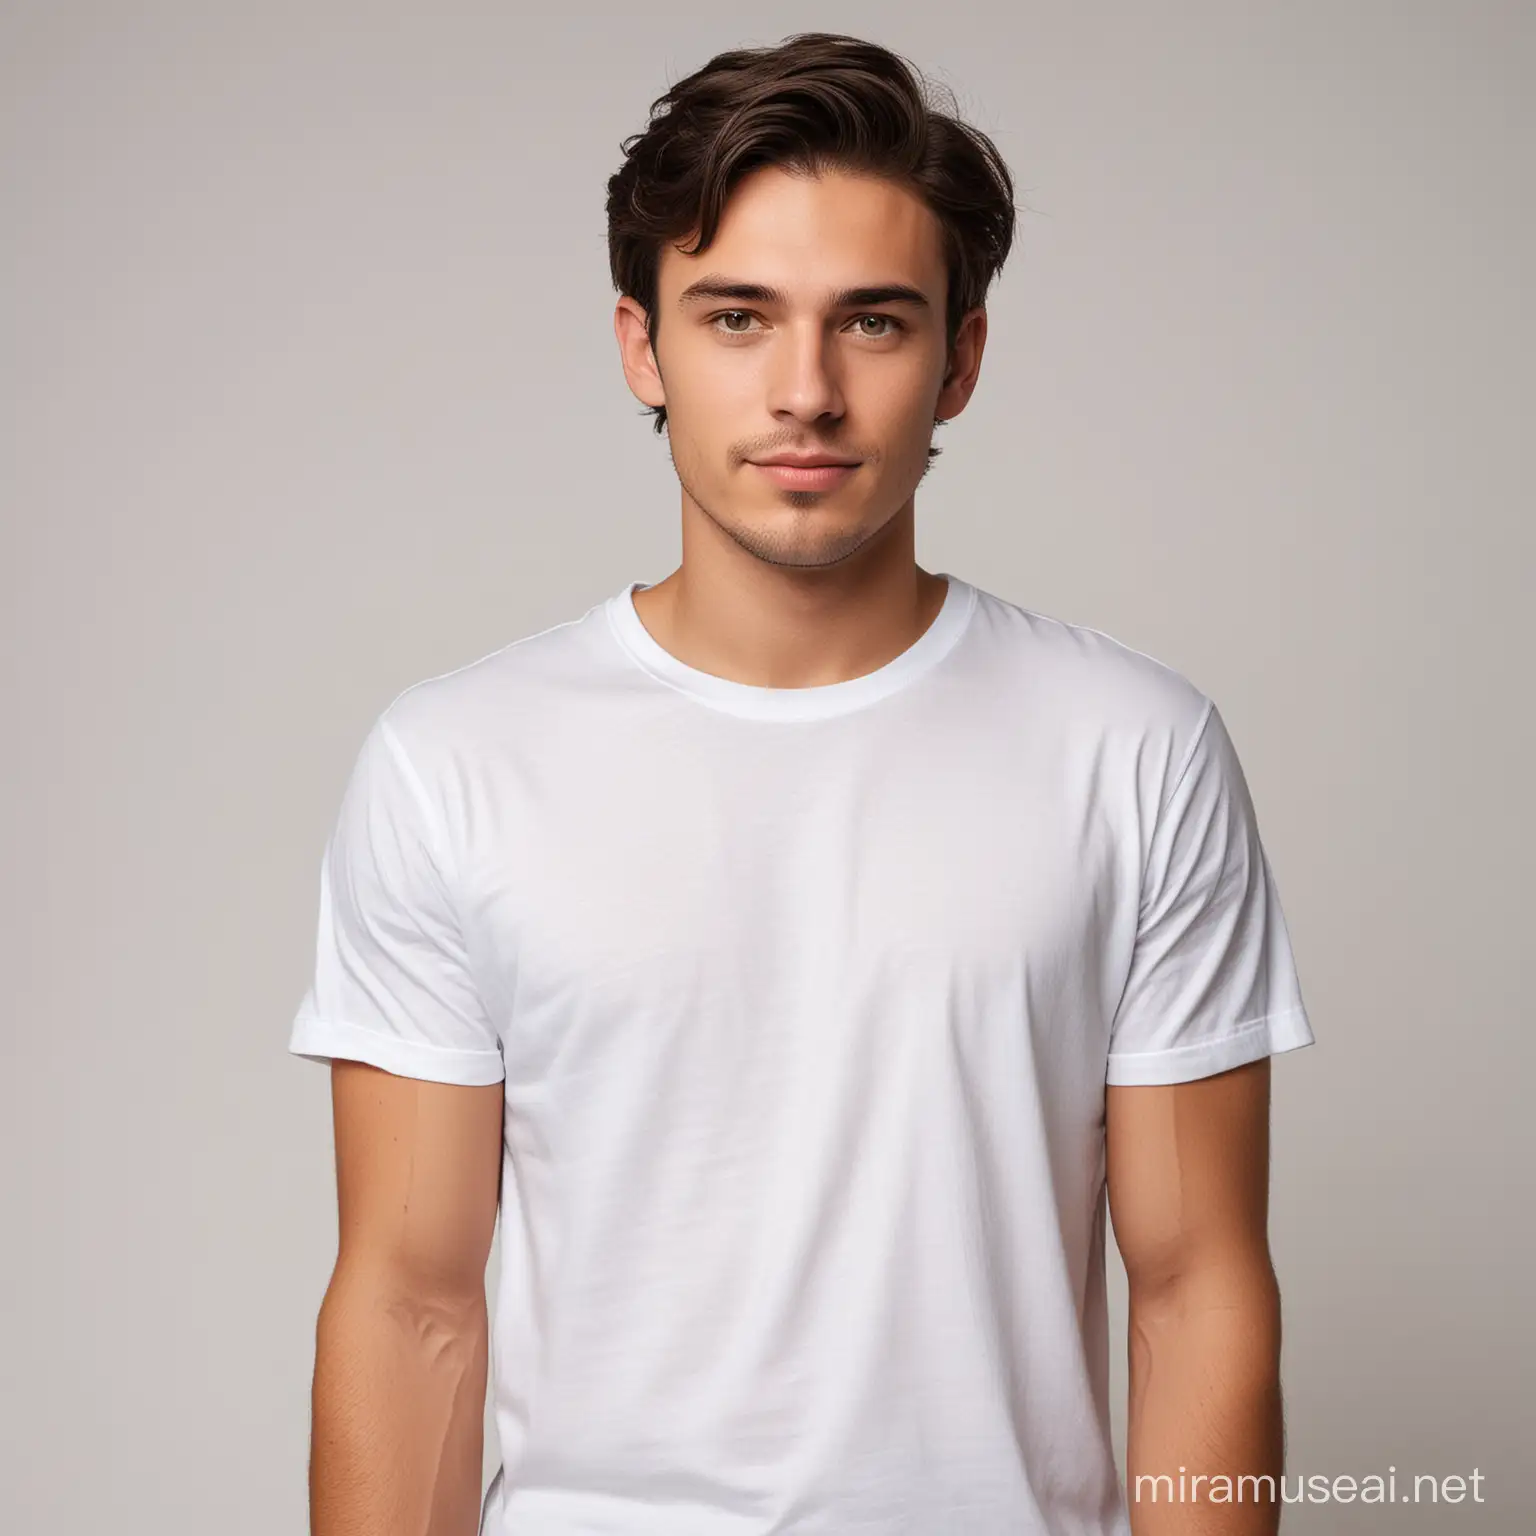 Young Adult in Plain White TShirt Against Light Background